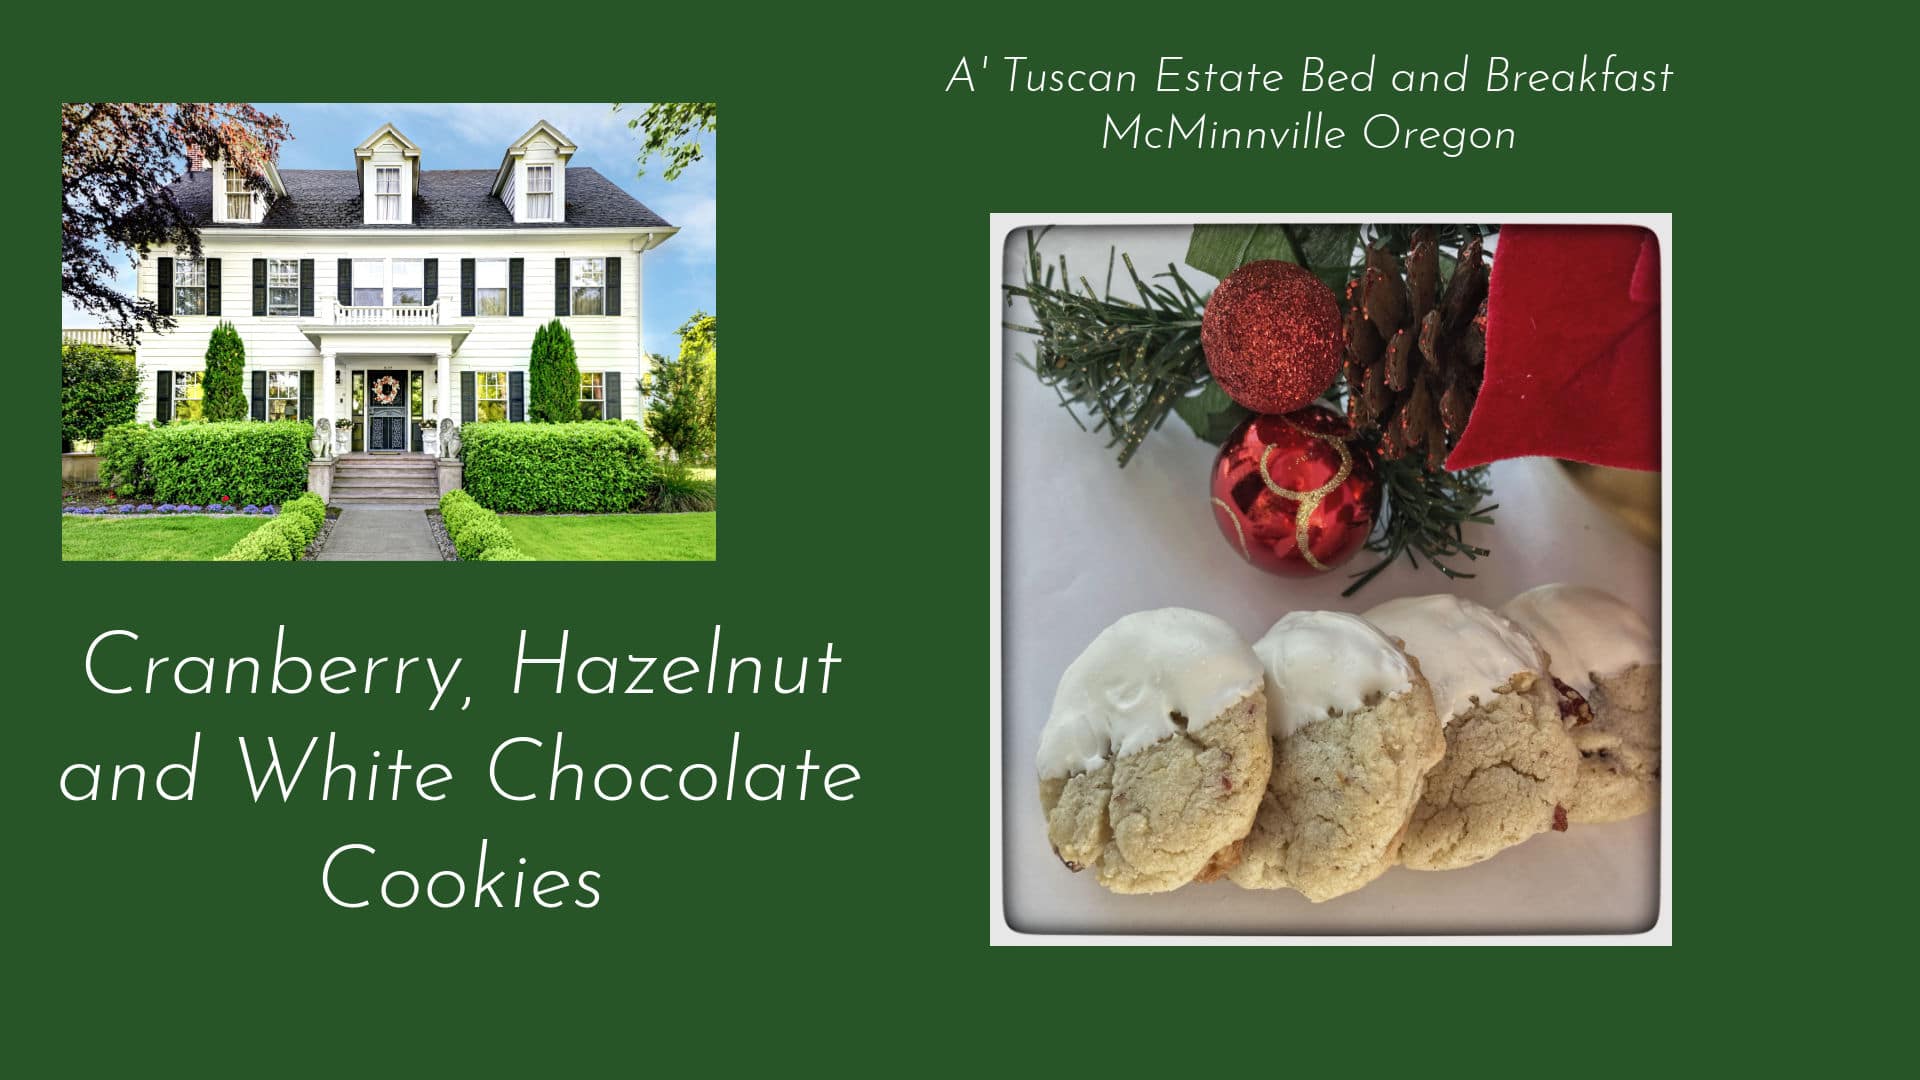 Cranberry, Hazelnut and White Chocolate Cookies at A'Tuscan Estate B&B